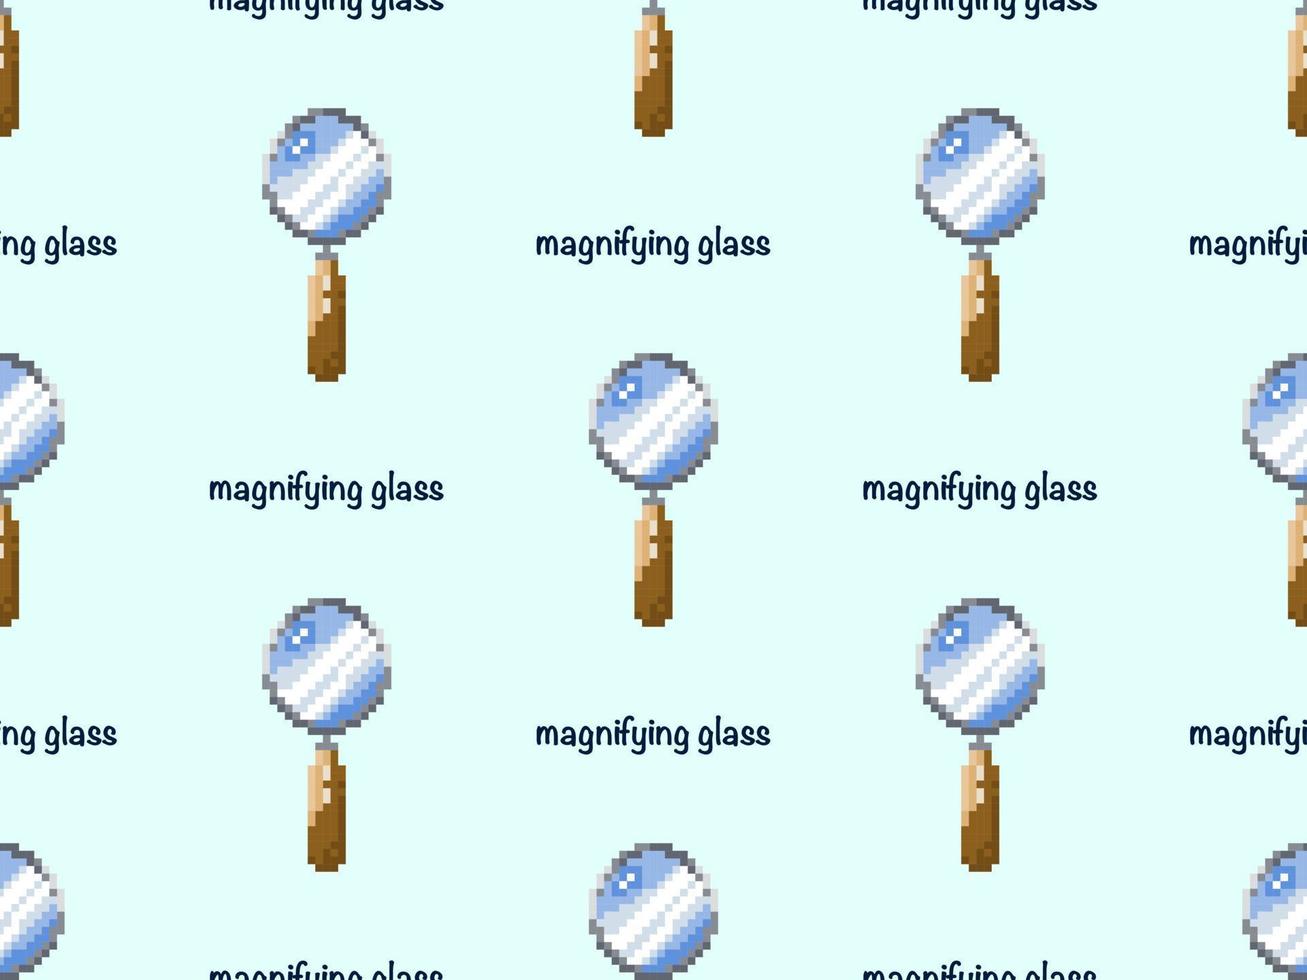 Magnifying glass cartoon character seamless pattern on blue background. Pixel style vector